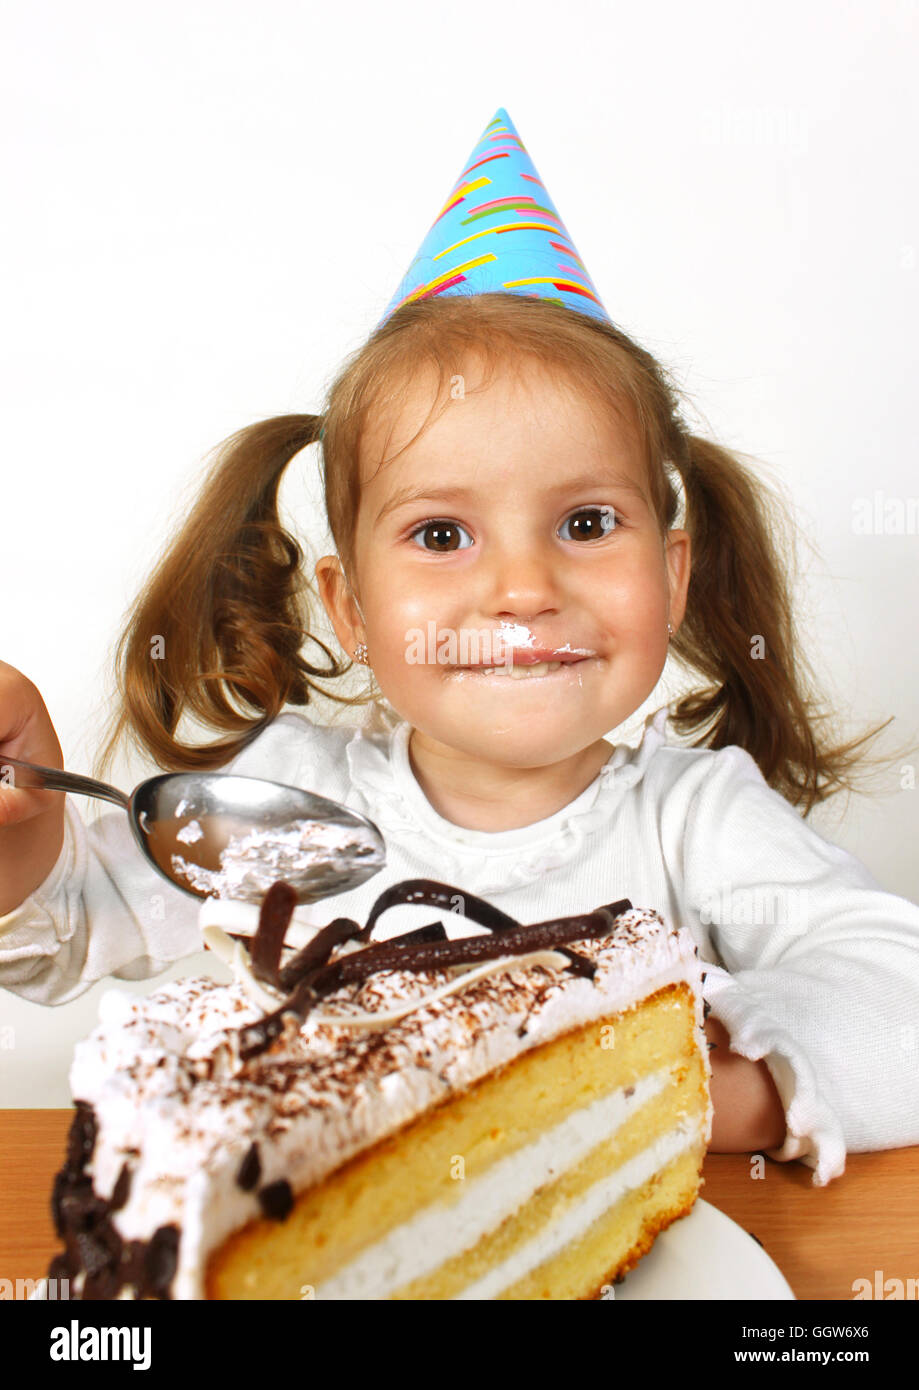 Portrait of smeared little girl with birthday hat eating cake Stock Photo